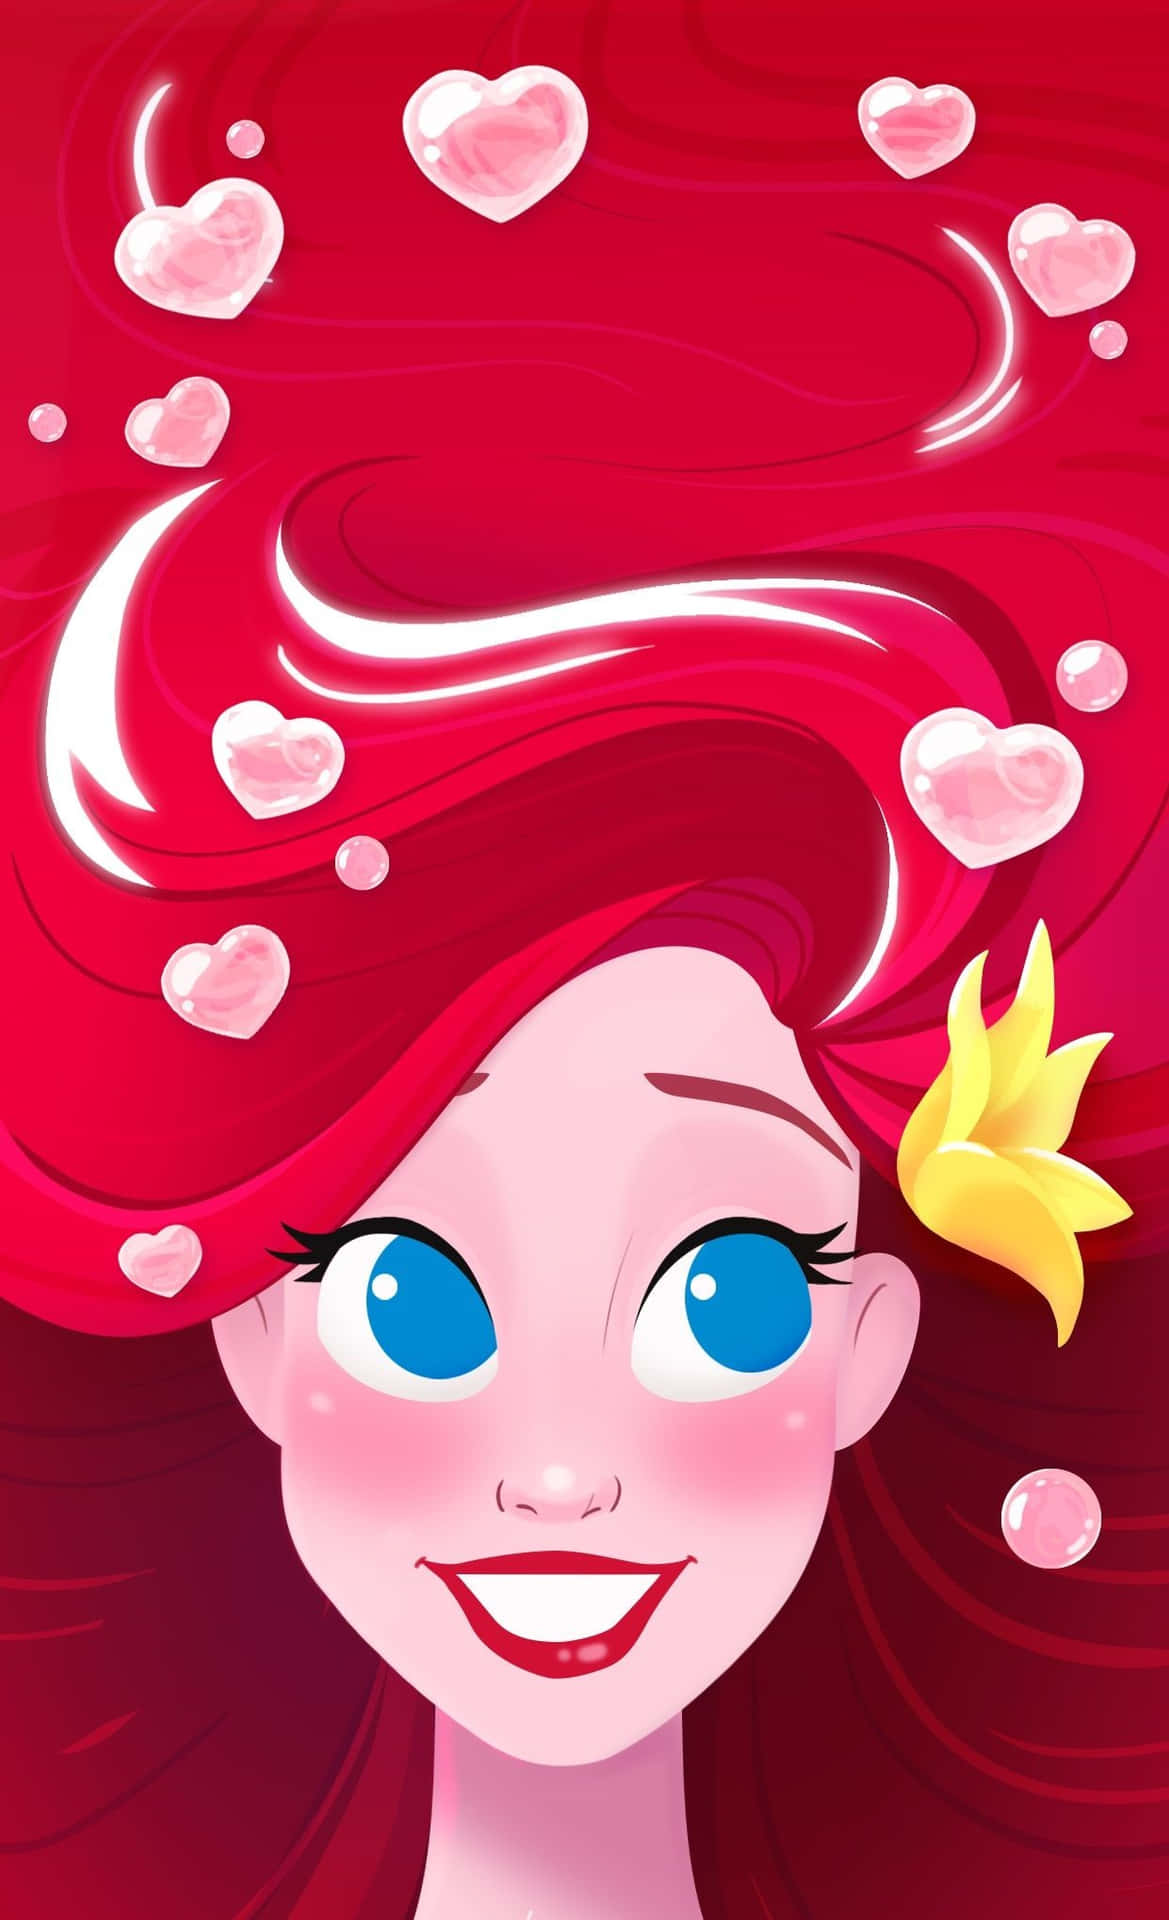 Express your Valentine's Day love with Disney! Wallpaper